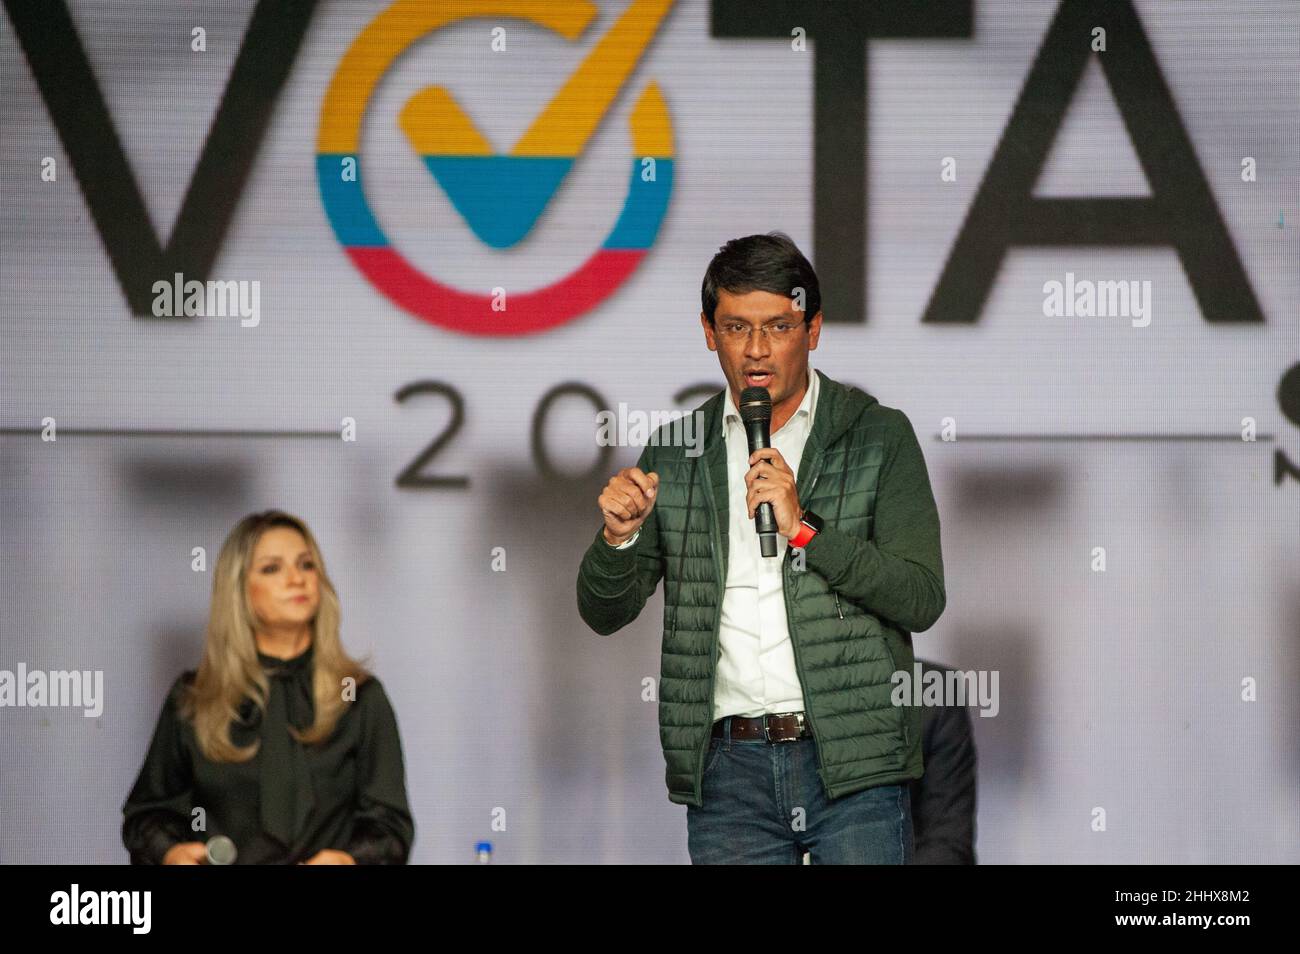 Bogota, Colombia on January 25, 2022. Camilo Romero member of the political alliance 'Pacto Historico' speaks during the first presidential candidates debate in Bogota, Colombia on January 25, 2022. Credit: Long Visual Press/Alamy Live News Stock Photo